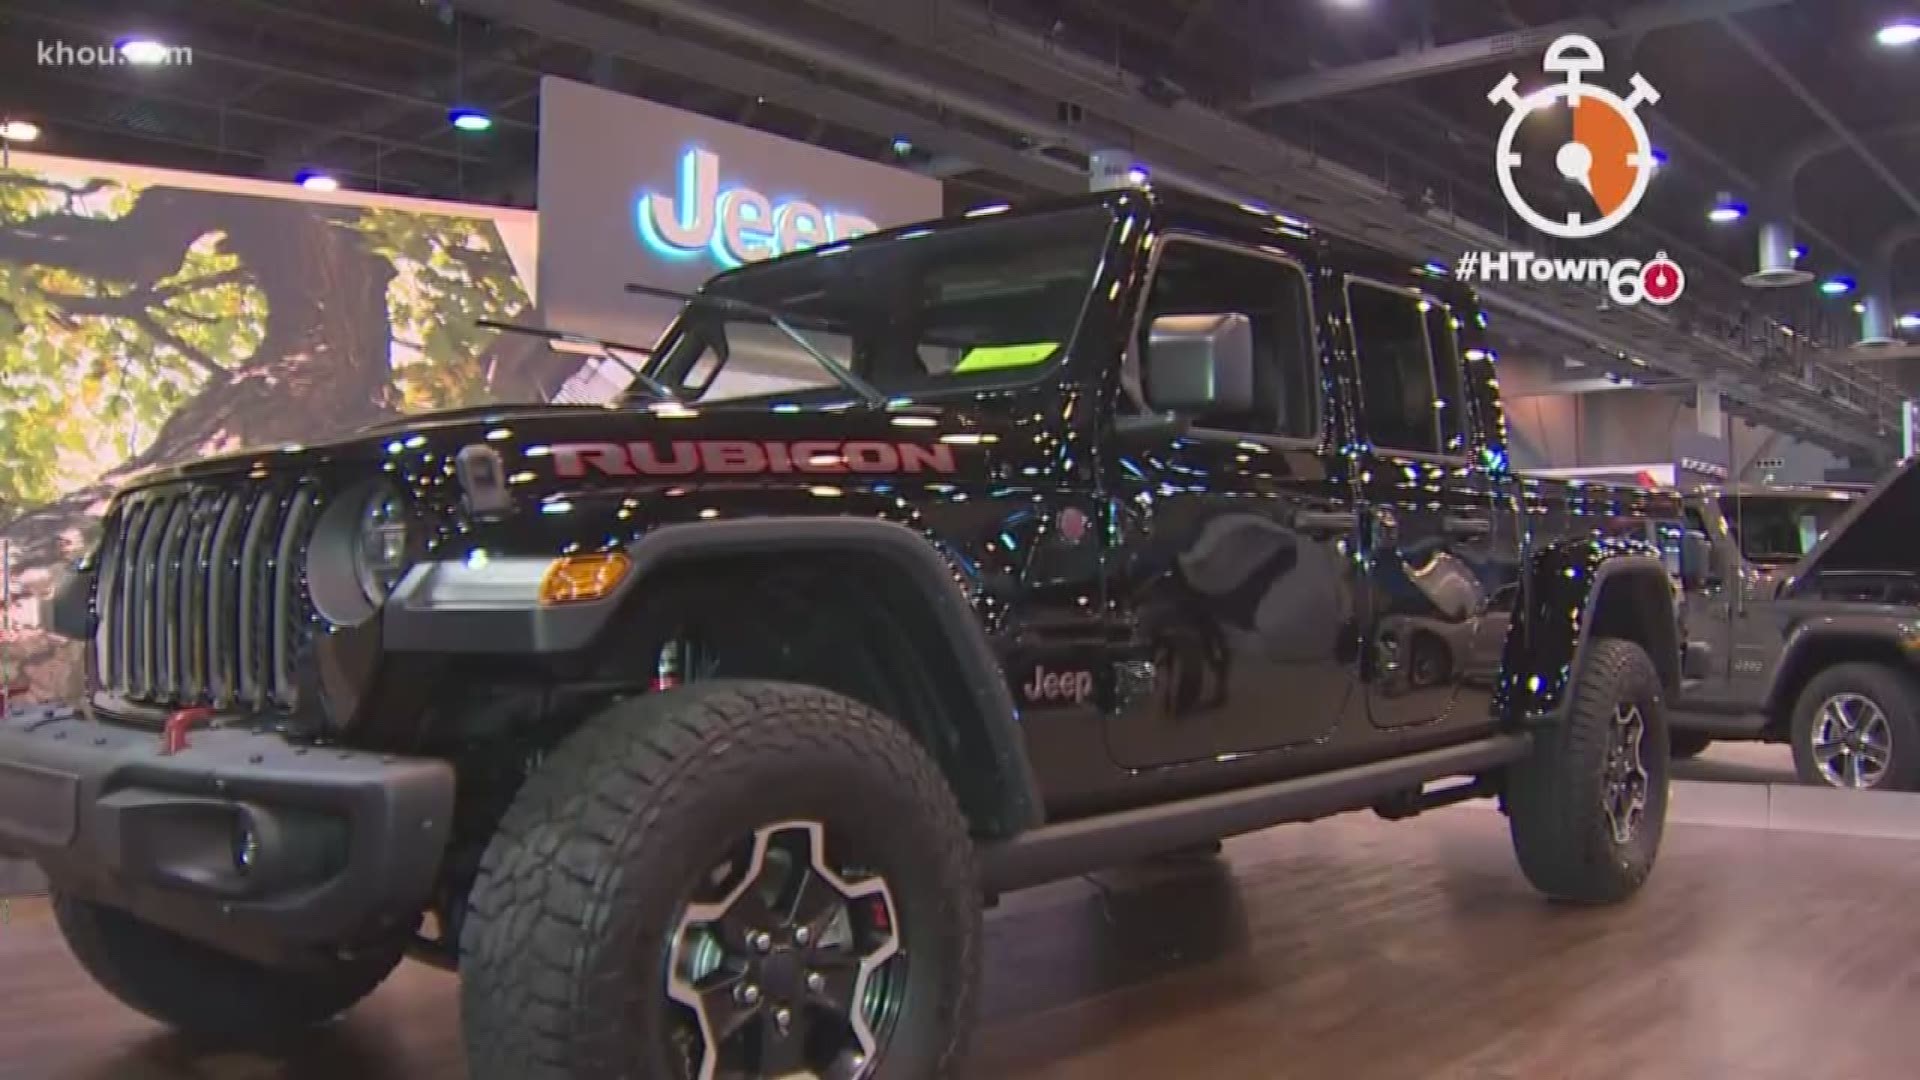 The Houston Auto Show opens Wednesday at NRG Center! Our Janel Forte takes us for an inside look in this morning's HTown60.